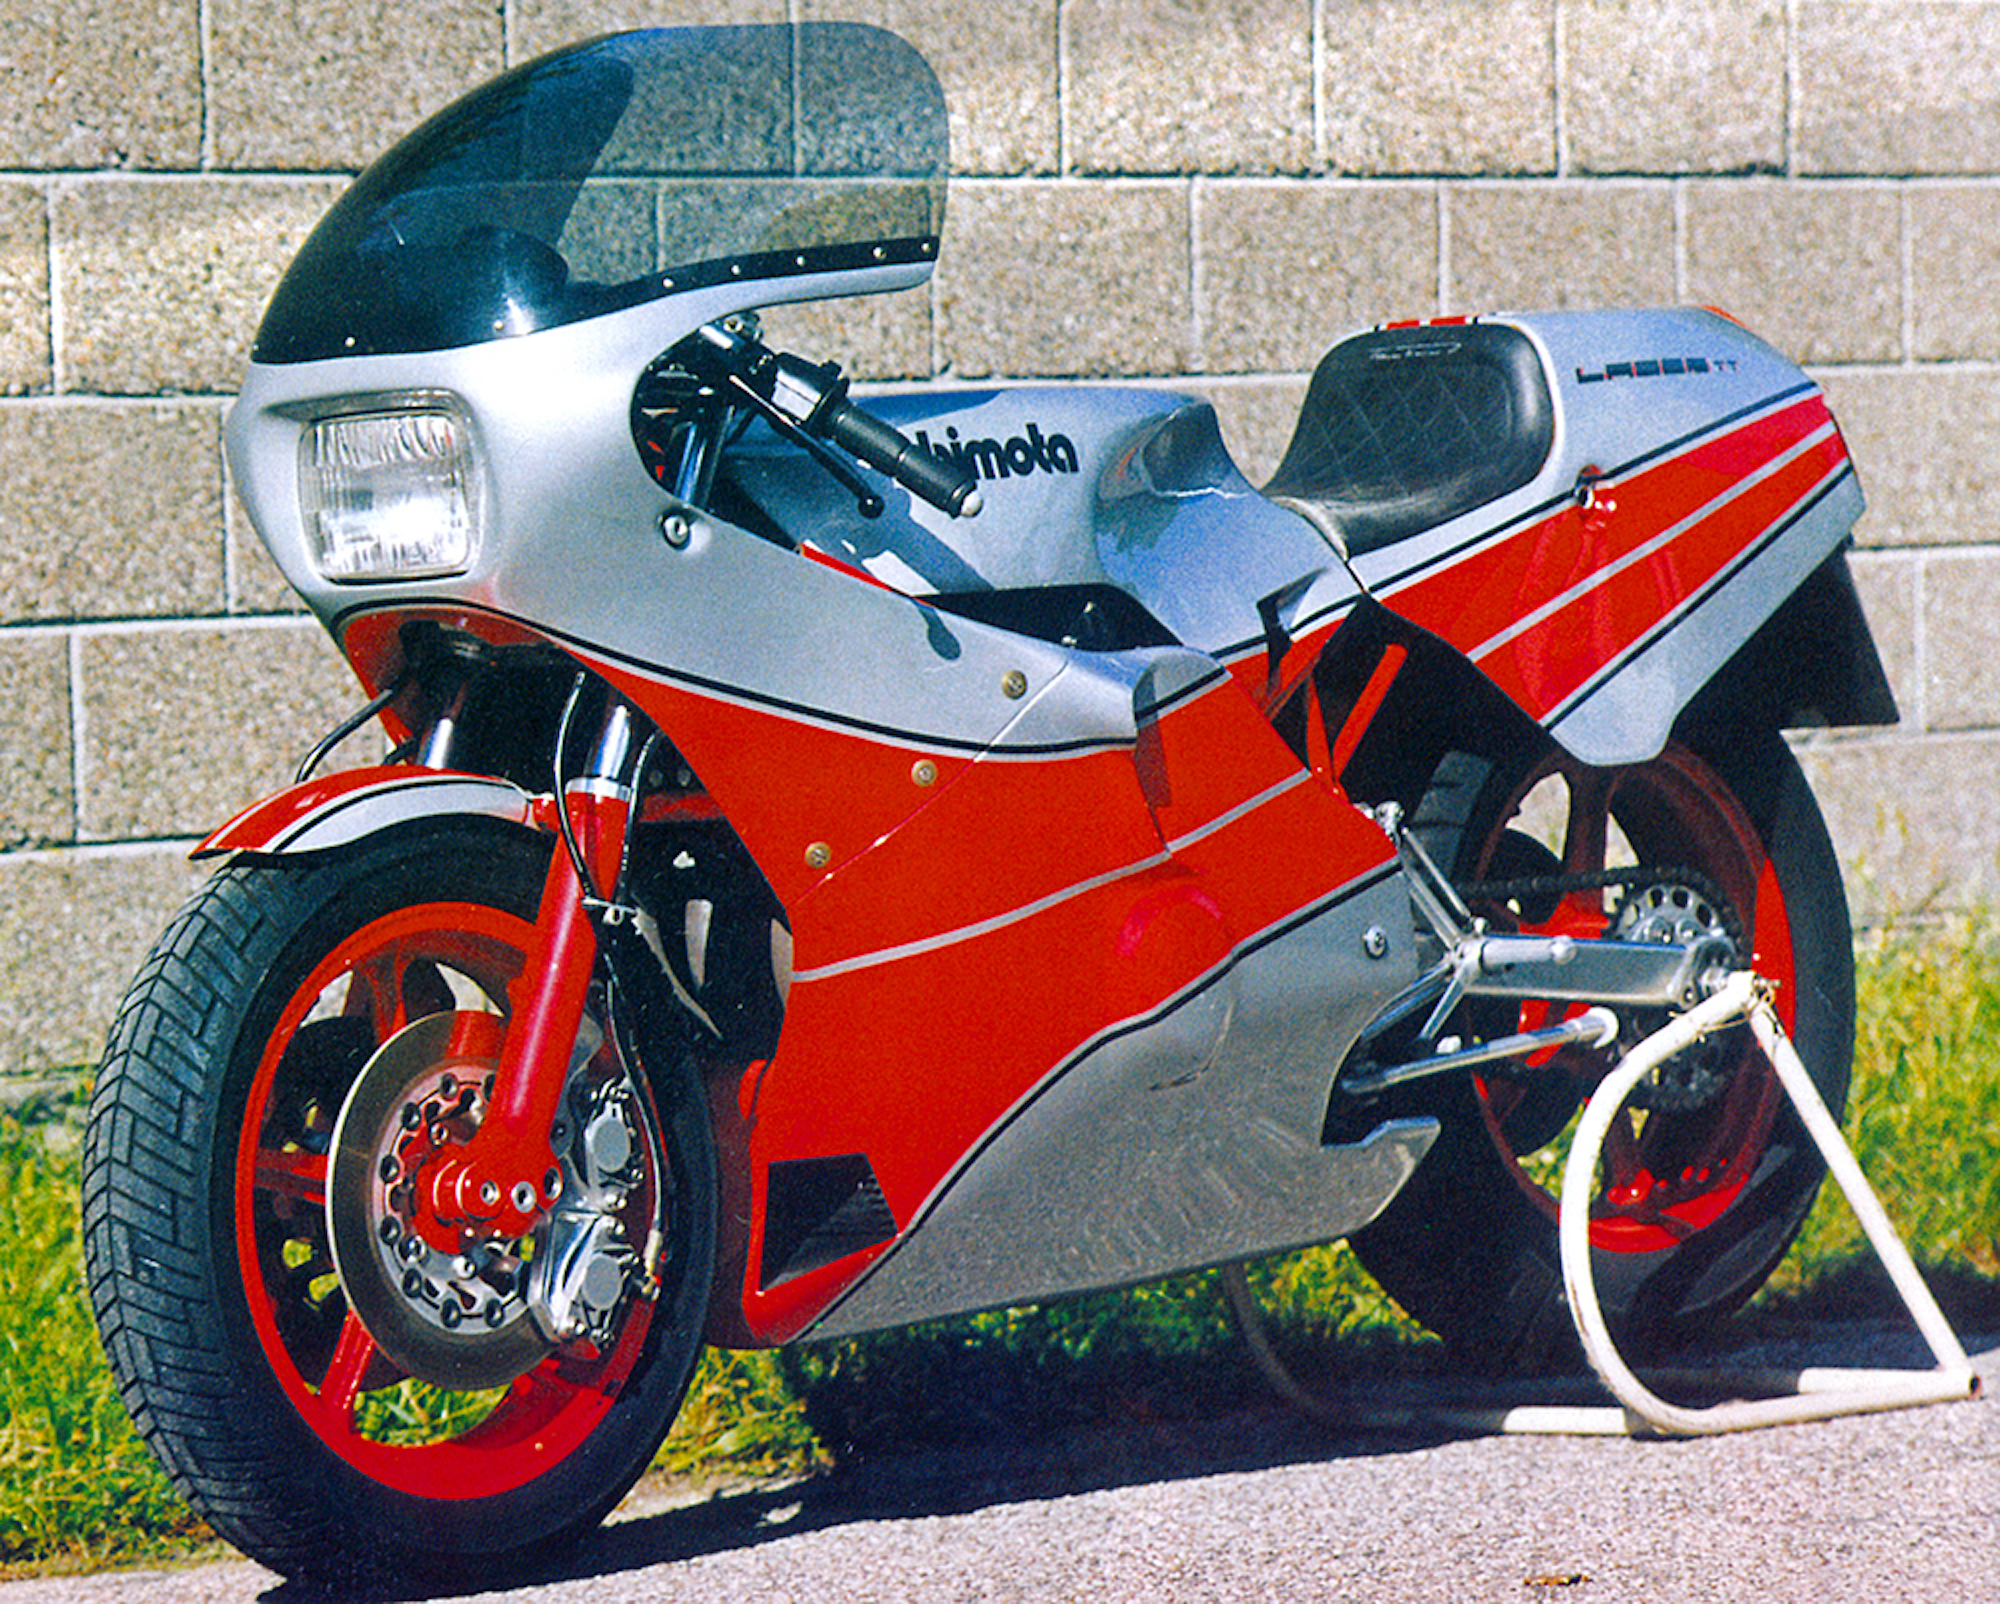 The Bimota KB2, personalized to Tamburini's specific preferences. Media sourced from AMCN.